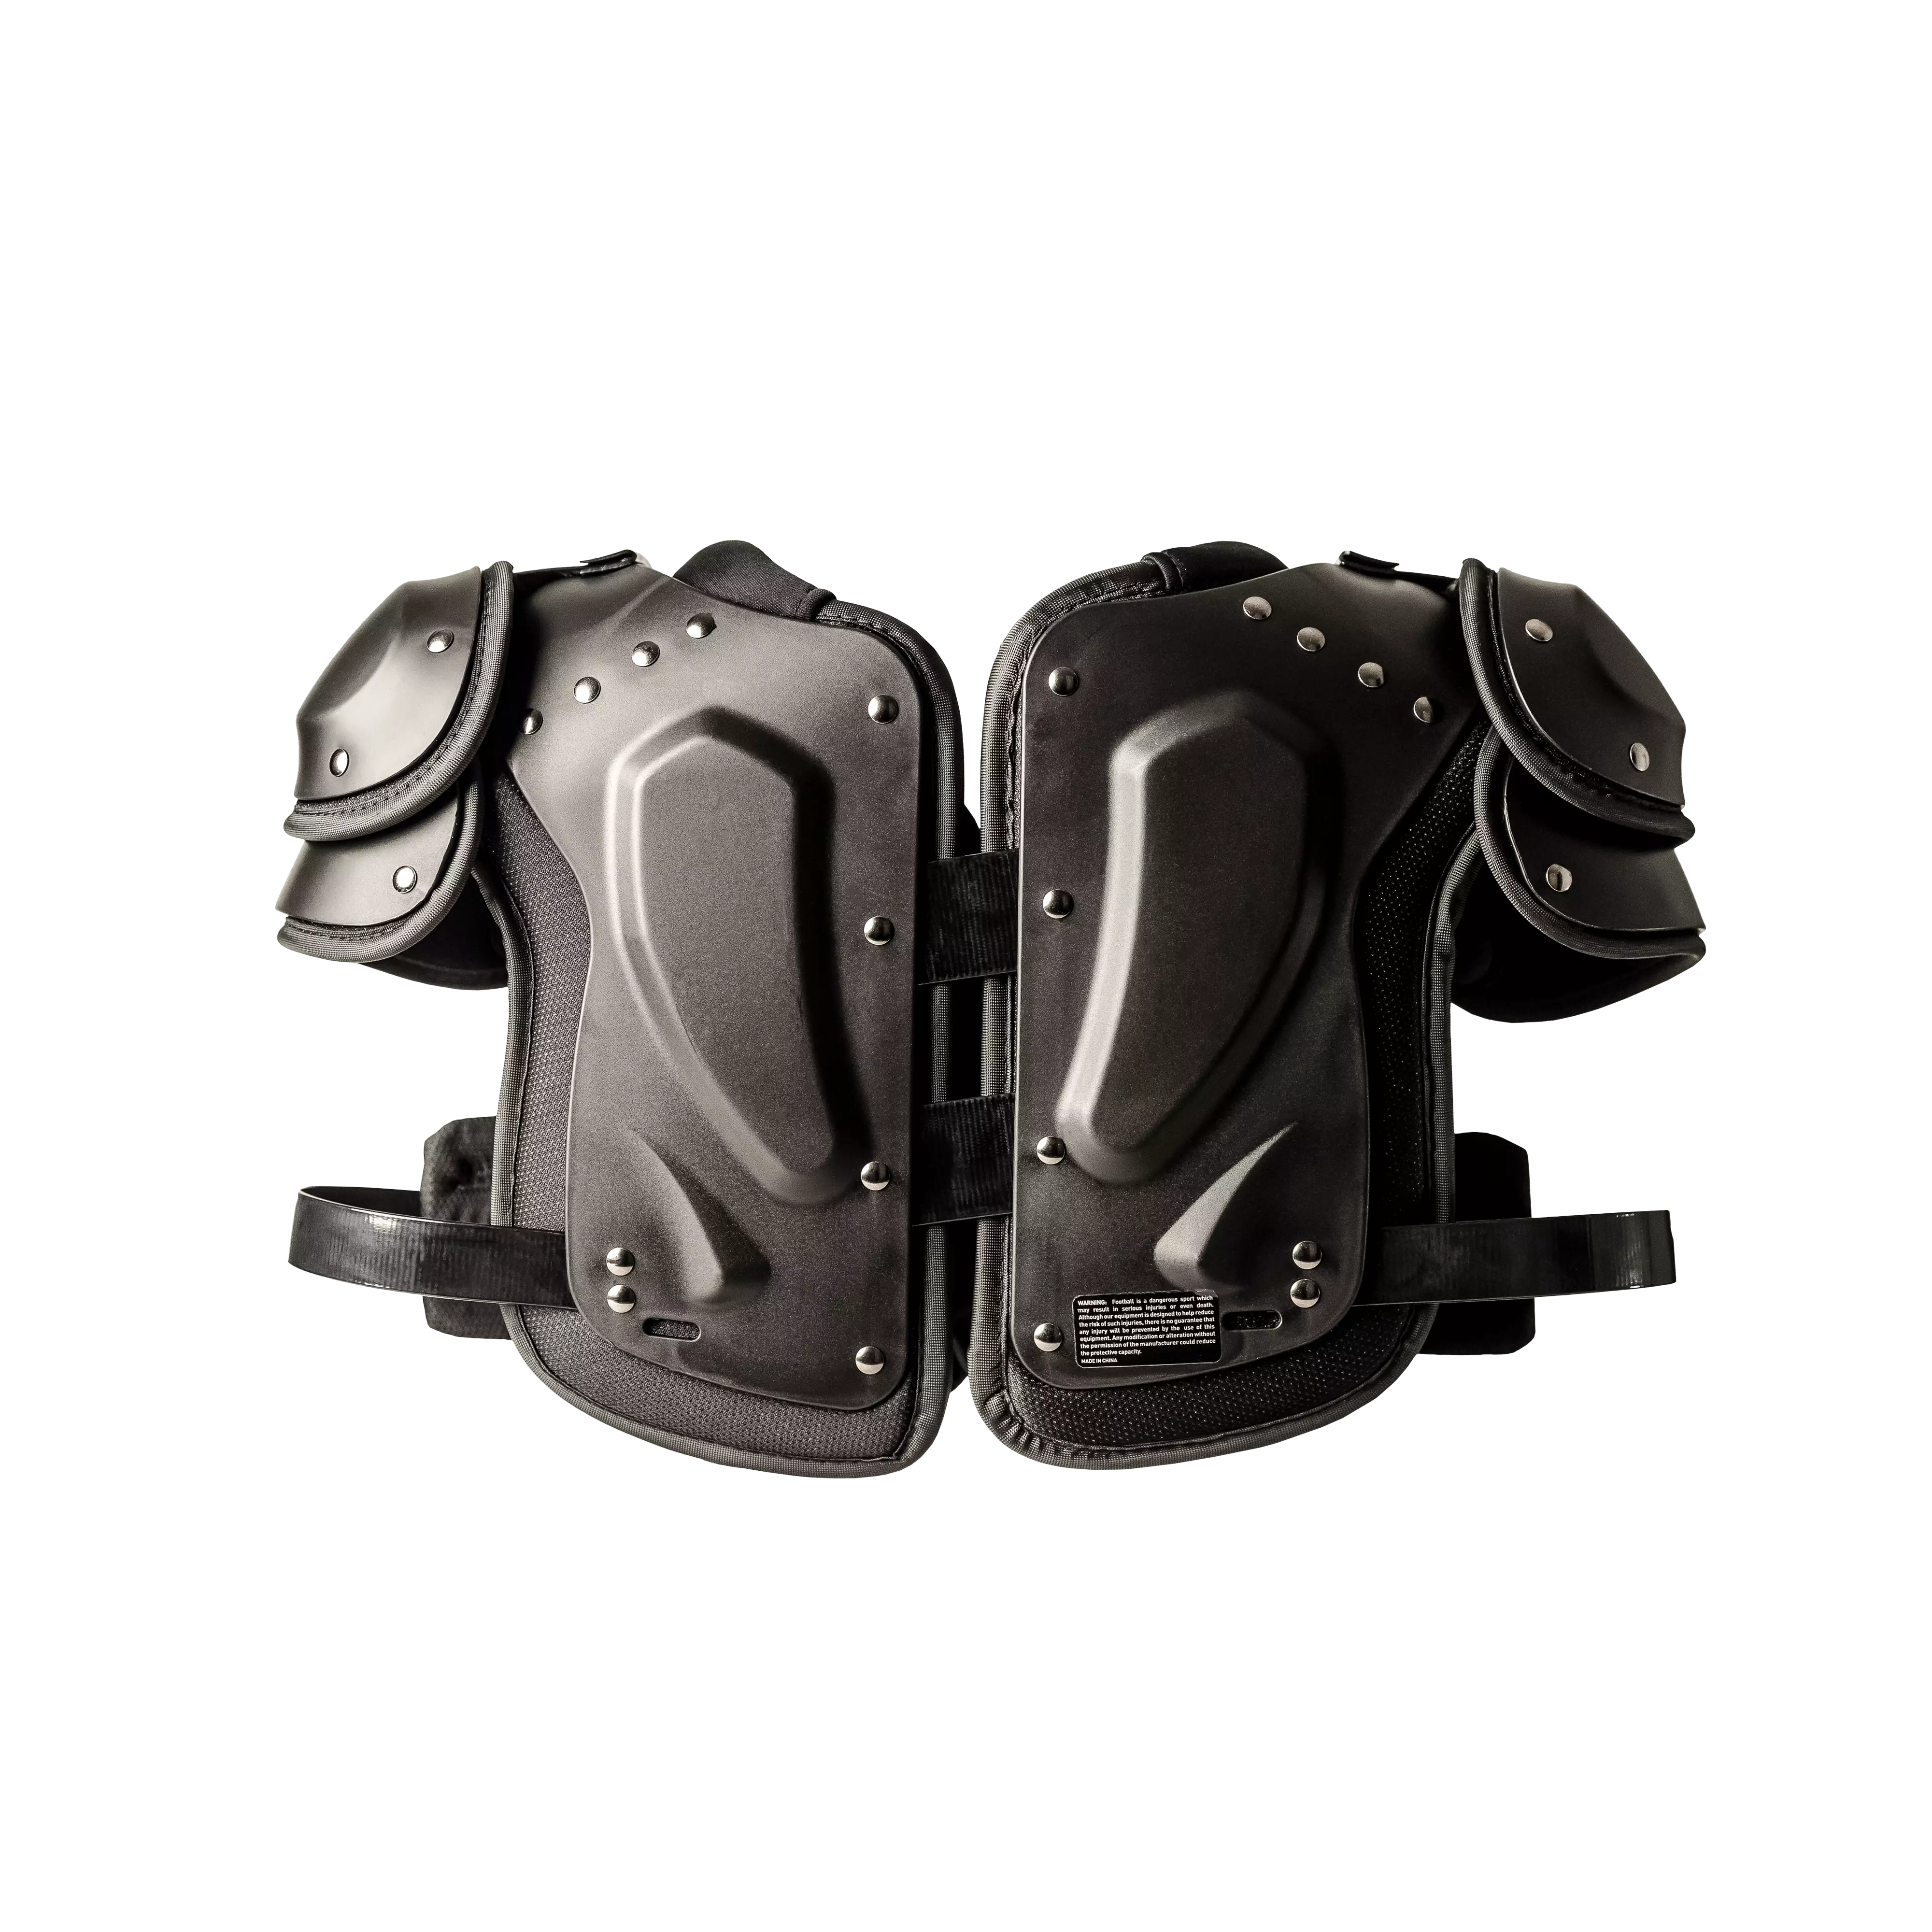 Backside view of Xenith Flyte 2 shoulder pads.